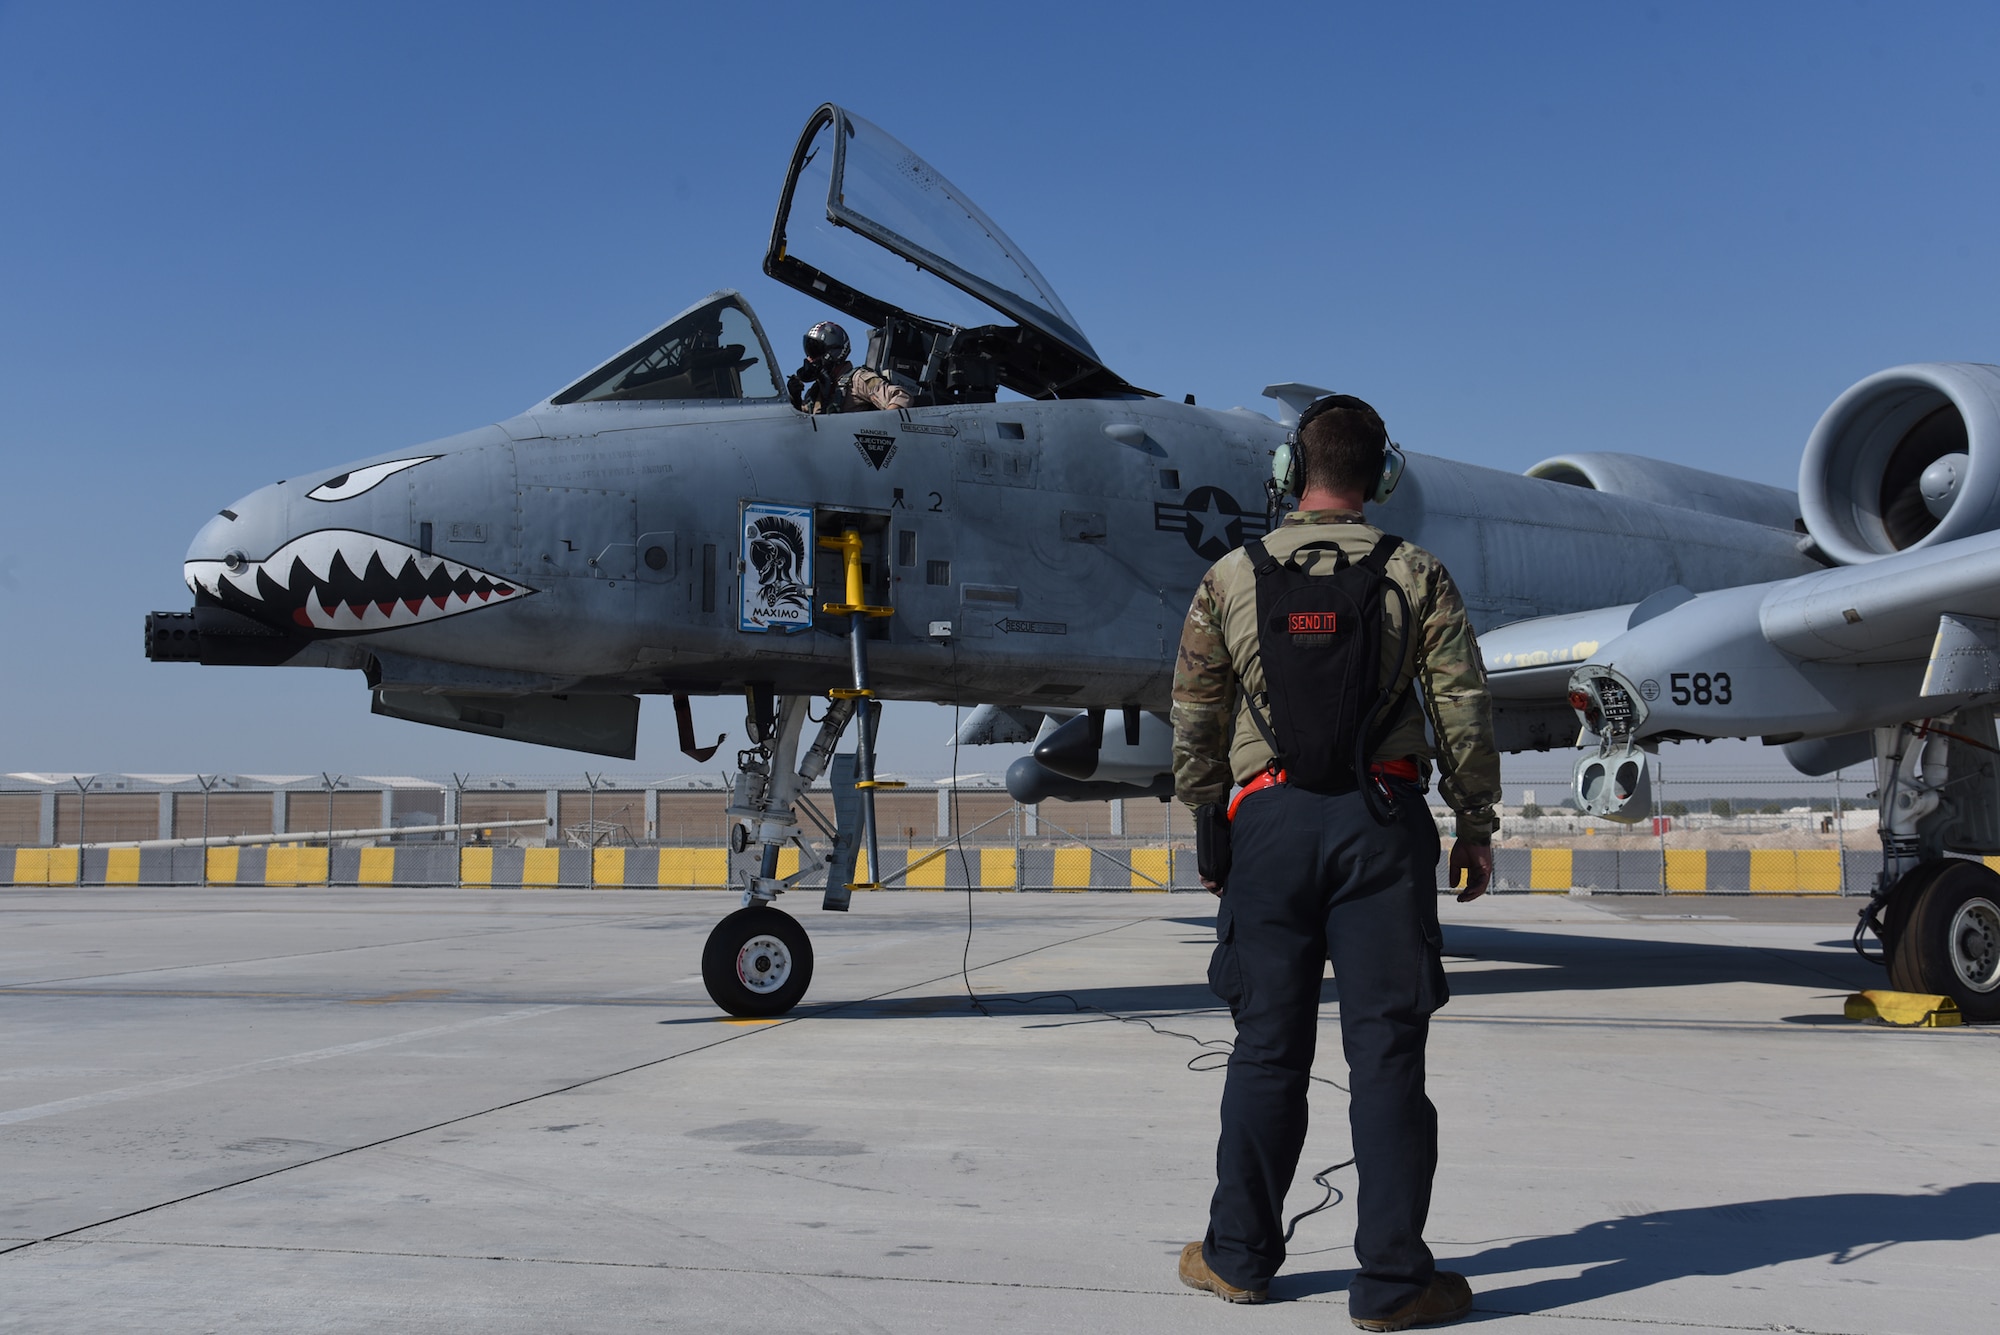 U.S. Air Force Airman First Class Matthew Cover, 75th Expeditionary Fighter Generation Squadron crew chief, prepares a U.S. Air Force A-10 Thunderbolt II for the first sortie at Al Dhafra Air Base, United Arab Emirates, April 6, 2023. The training mission was the first flown by an A-10 Thunderbolt II assigned to the 380th Air Expeditionary Wing and highlights the 380th AEW relationship with their UAE service member counterparts who share the airspace and runway around Al Dhafra AB. (U.S. Air Force photo by Tech. Sgt. Chris Jacobs/released)